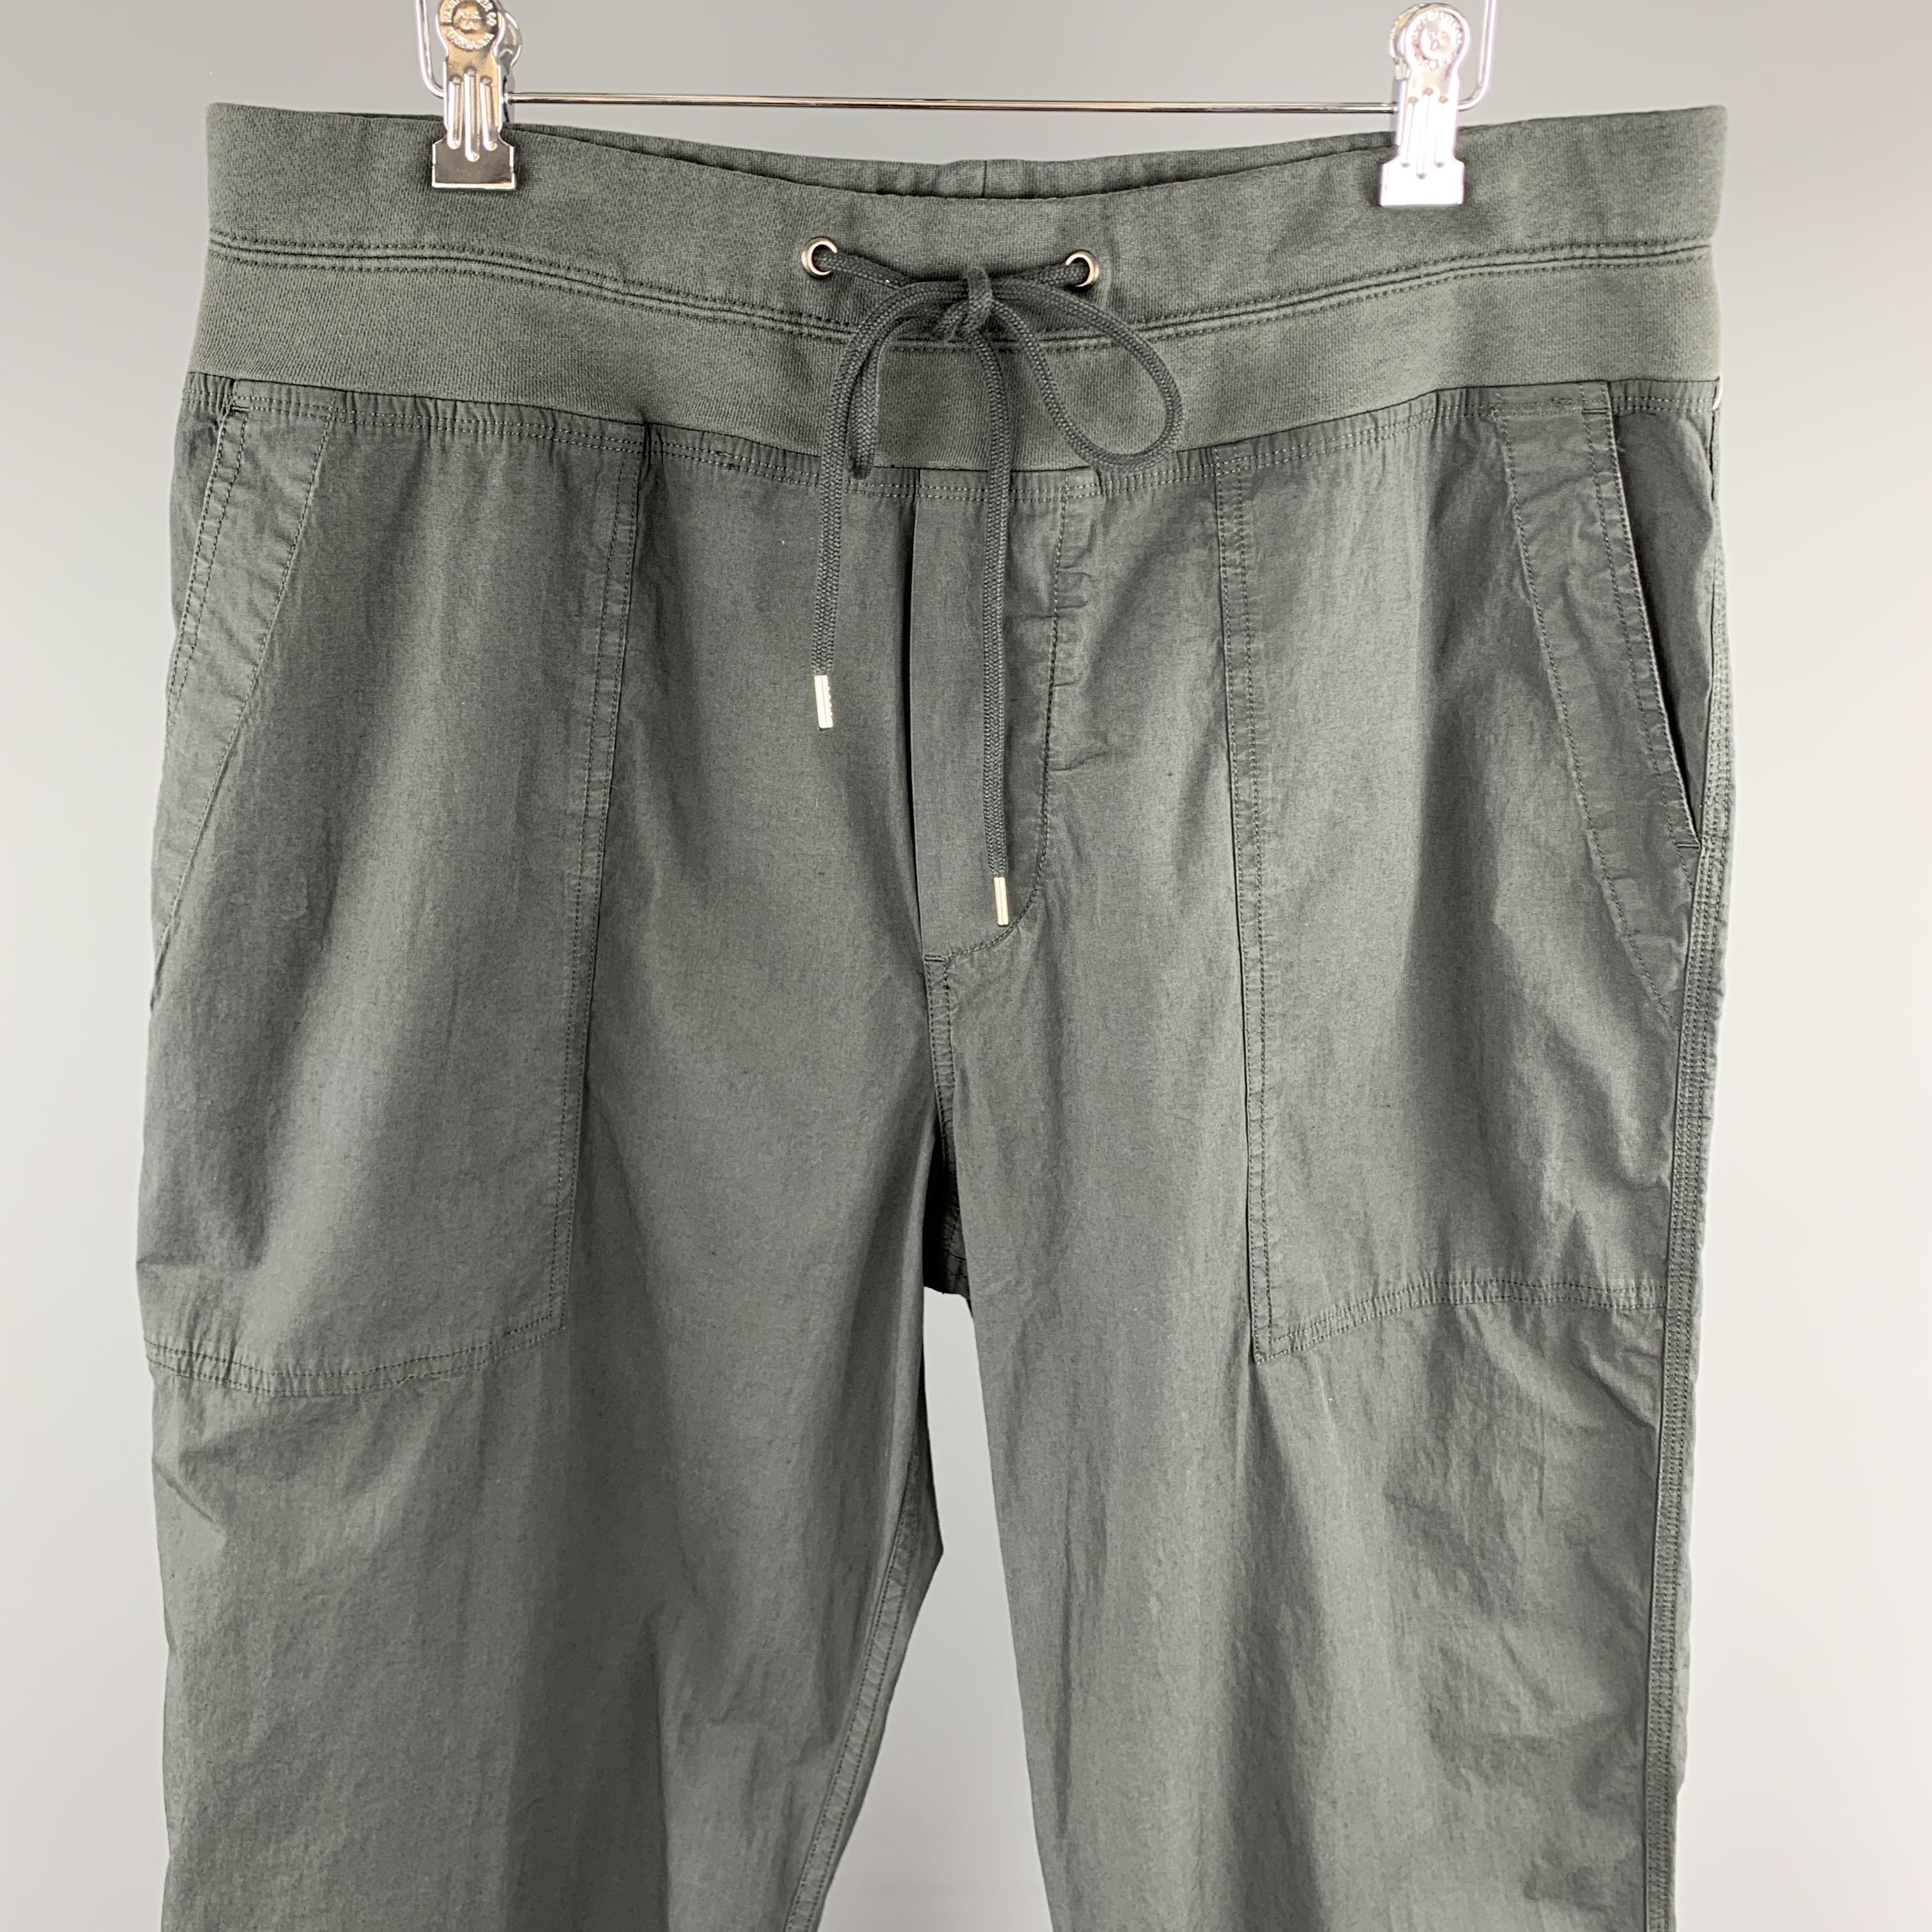 JAMES PERSE jogger style pants come in light weight cotton poplin with outer seam pockets and jersey drawstring waistband. 

New With Tags.
Marked: 2

Measurements:

Waist: 35 in.
Rise: 14 in.
Inseam: 29 in.